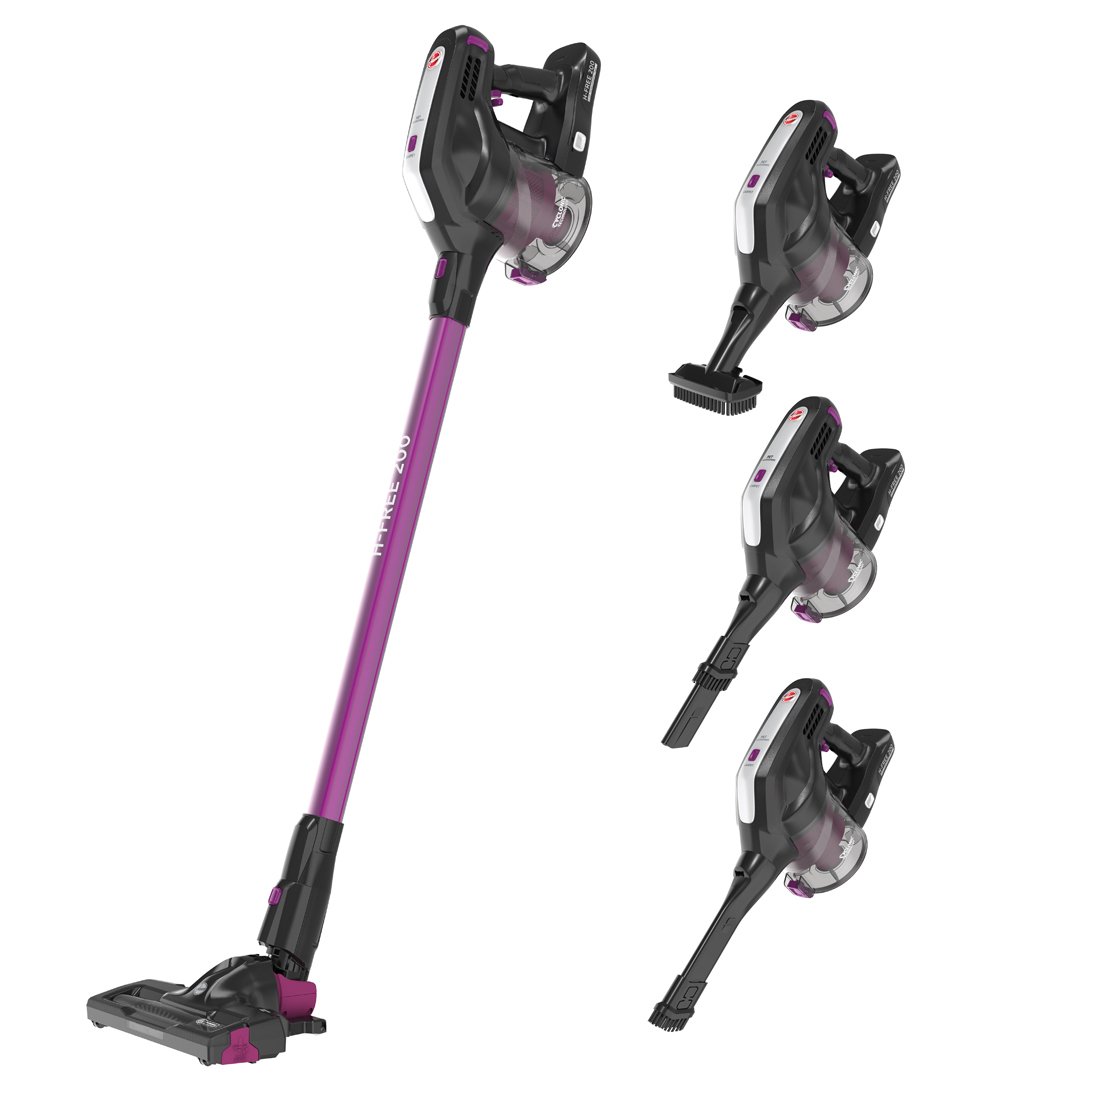 Hoover H-FREE 200 HF222MPT Pet Cordless Vacuum Cleaner